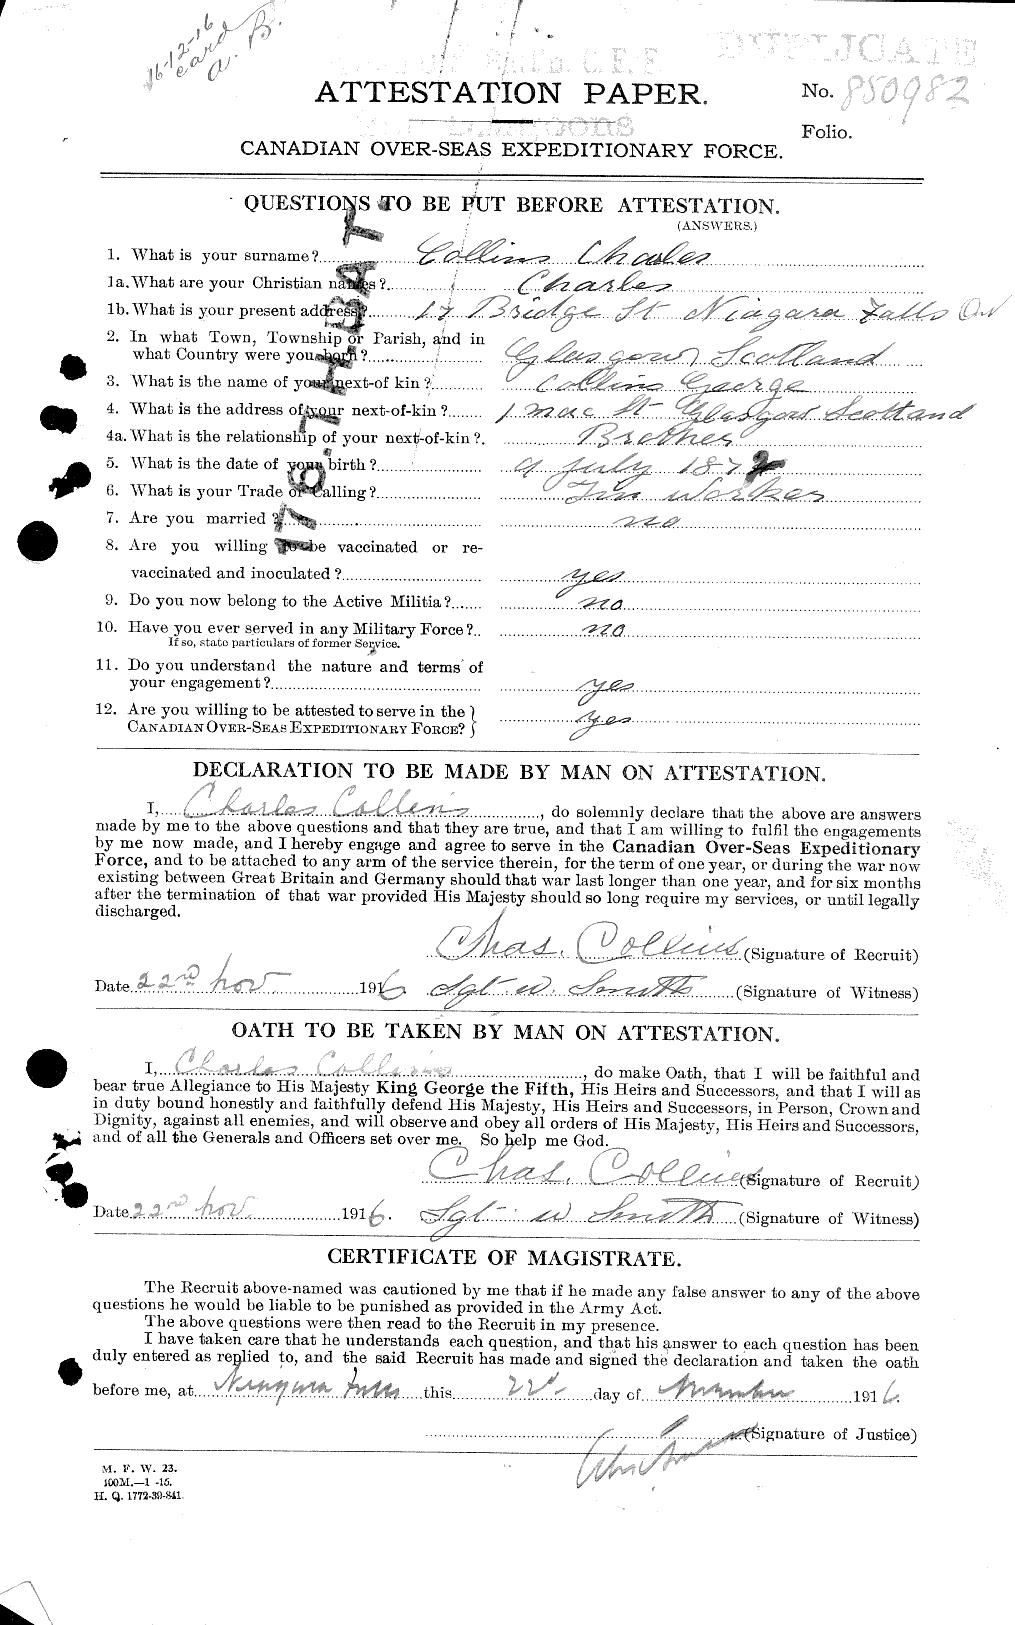 Personnel Records of the First World War - CEF 029016a